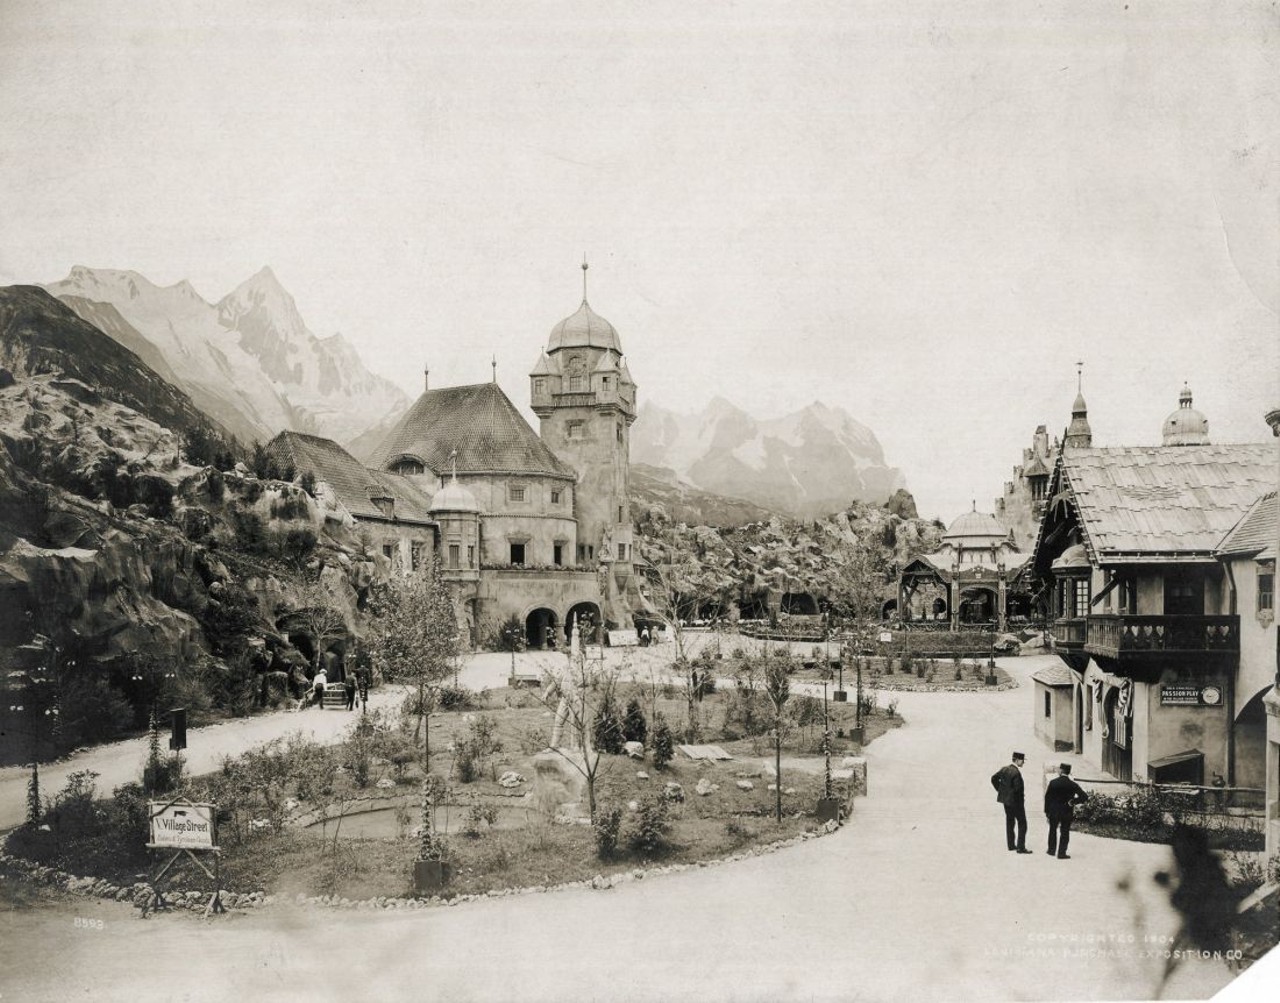 TYROLEAN ALPS ON THE PIKE AT THE 1904 WORLD'S FAIR.
Find out more about this photo at MoHistory.org.